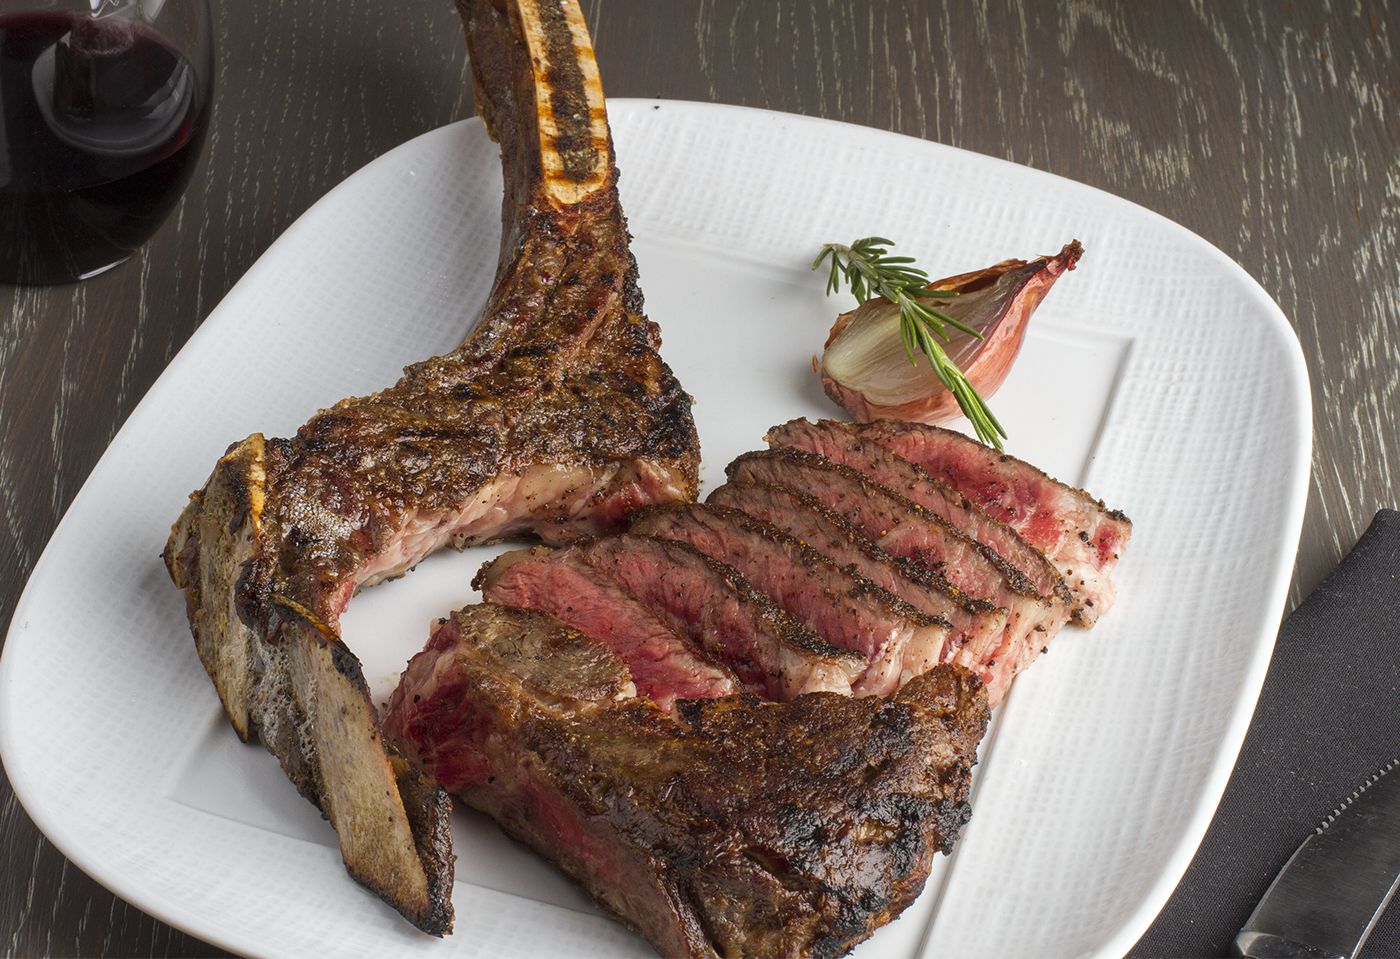 Knife Steakhouse in Dallas and Plano offers lots of steak options for Dad.